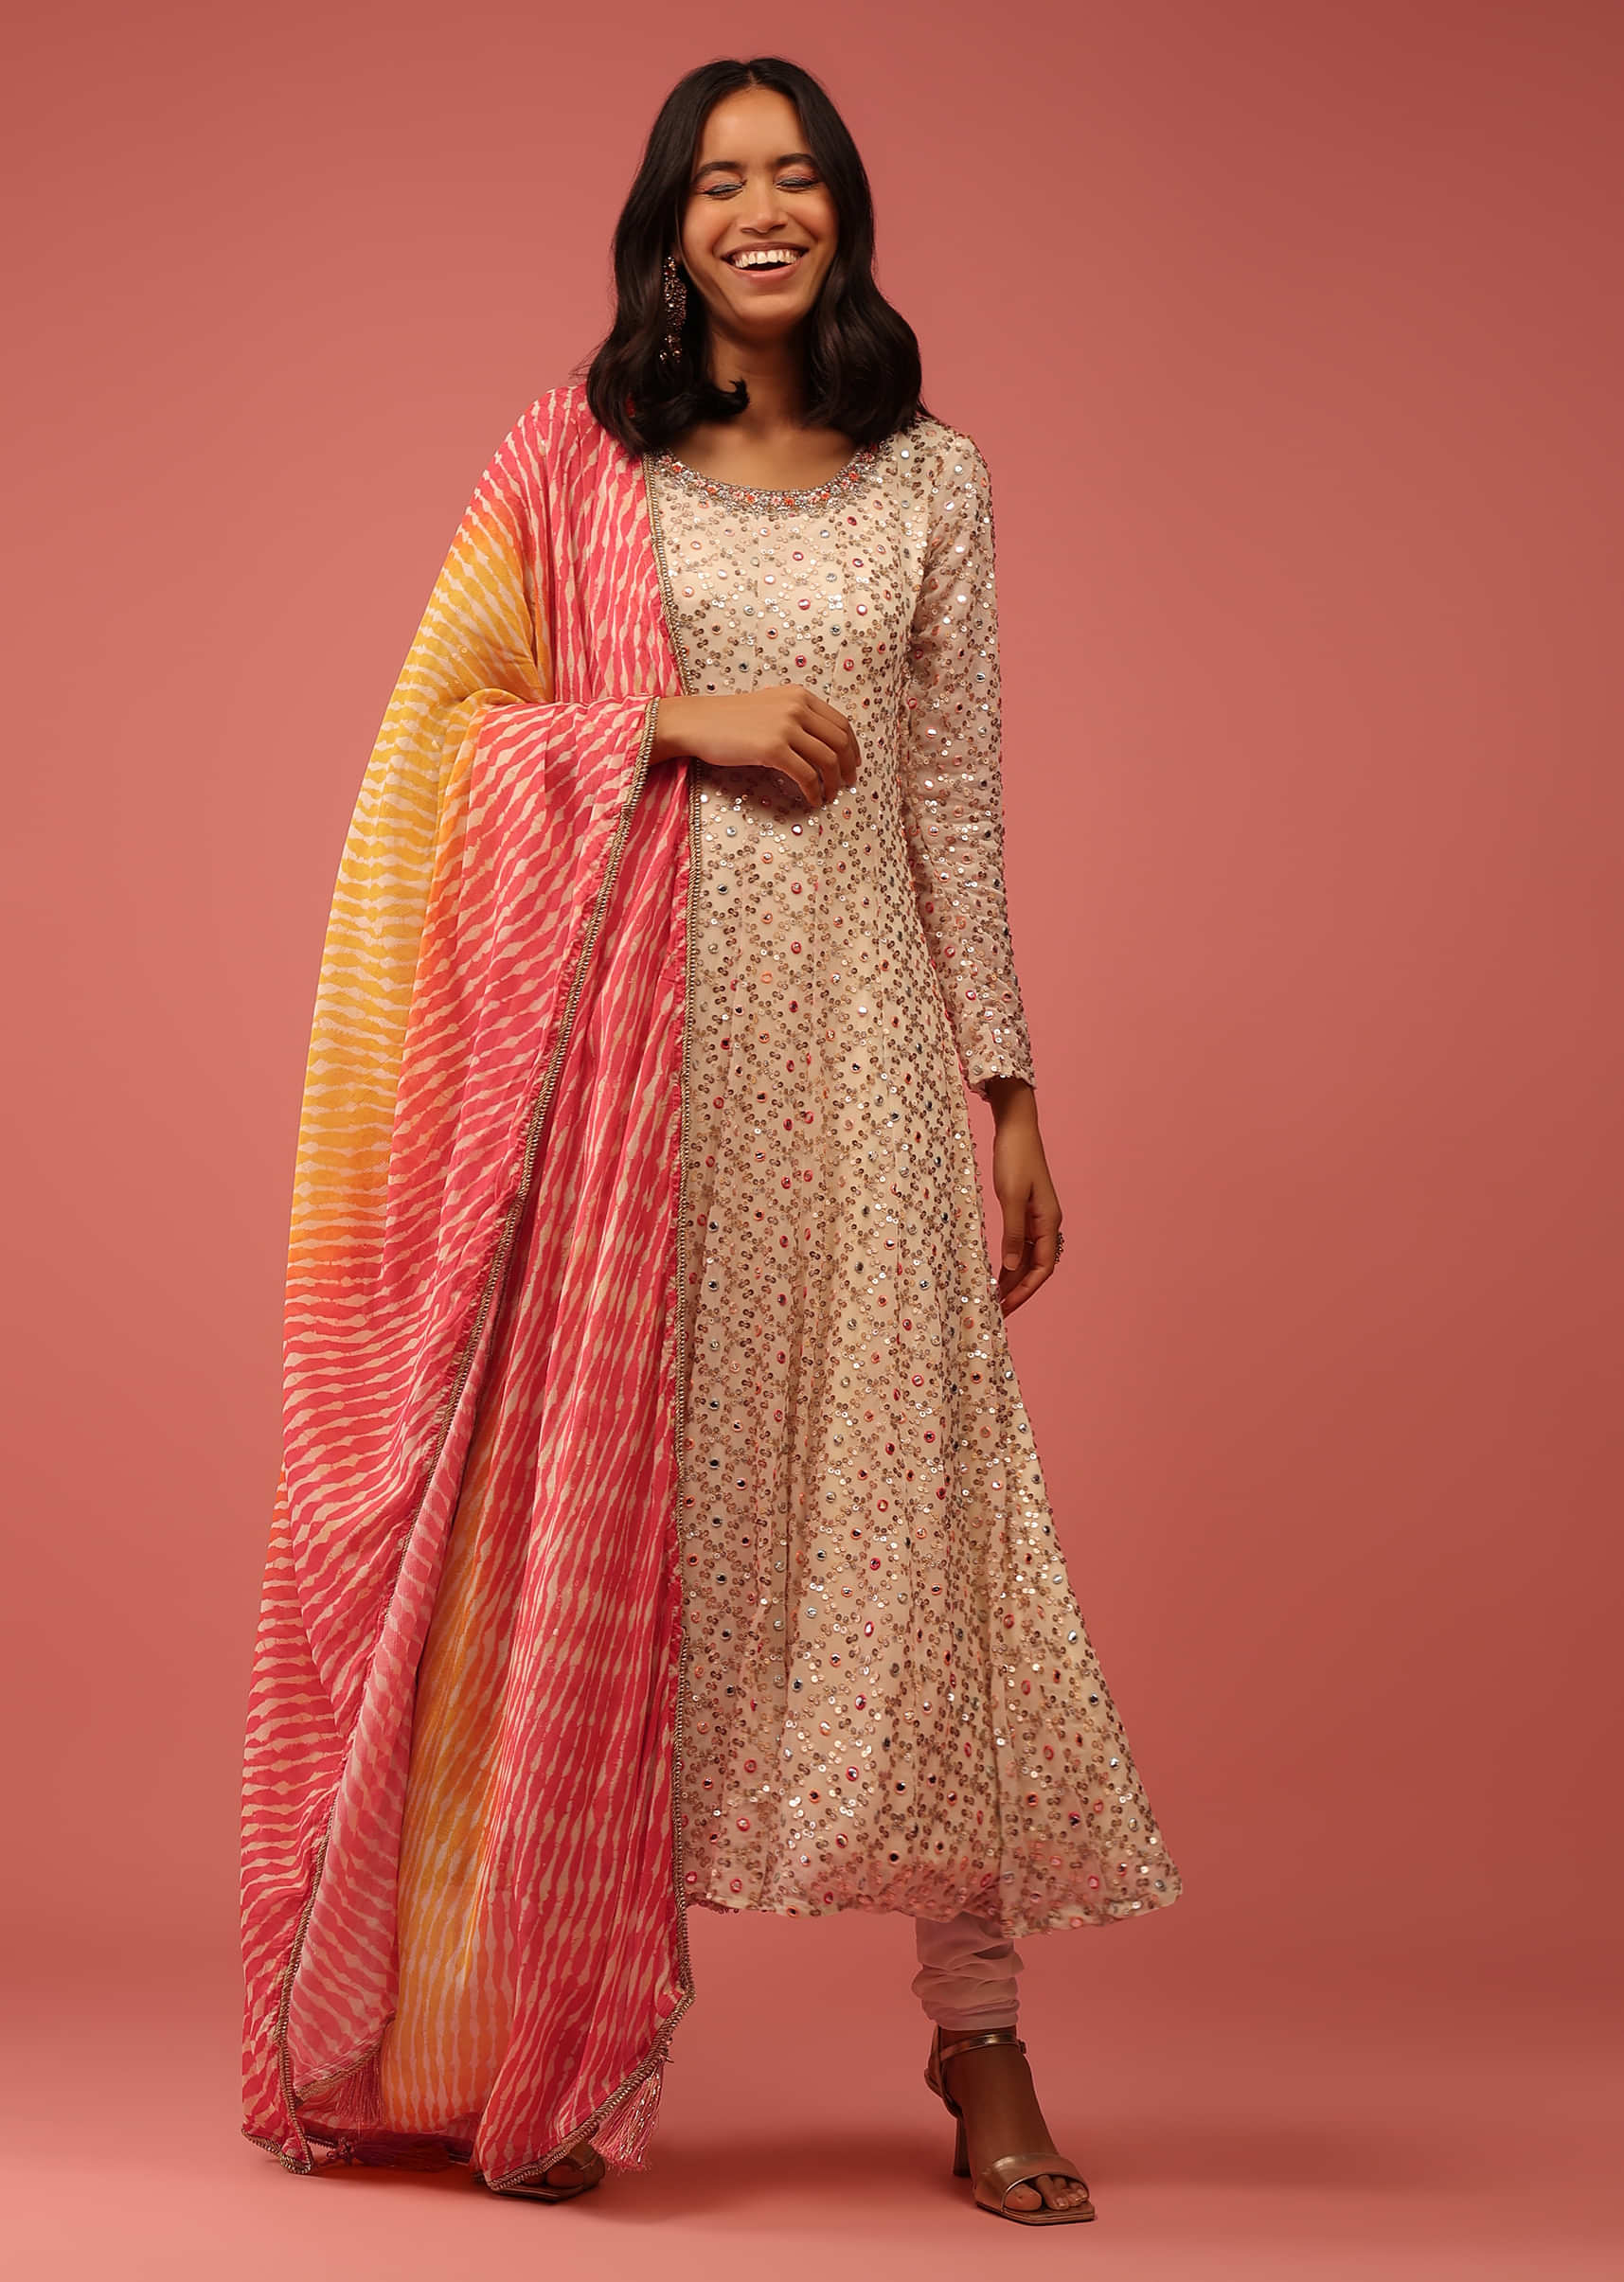 Off-White Anarkali Suit In Georgette With Multicolor Lehariya Dupatta And Embroidery